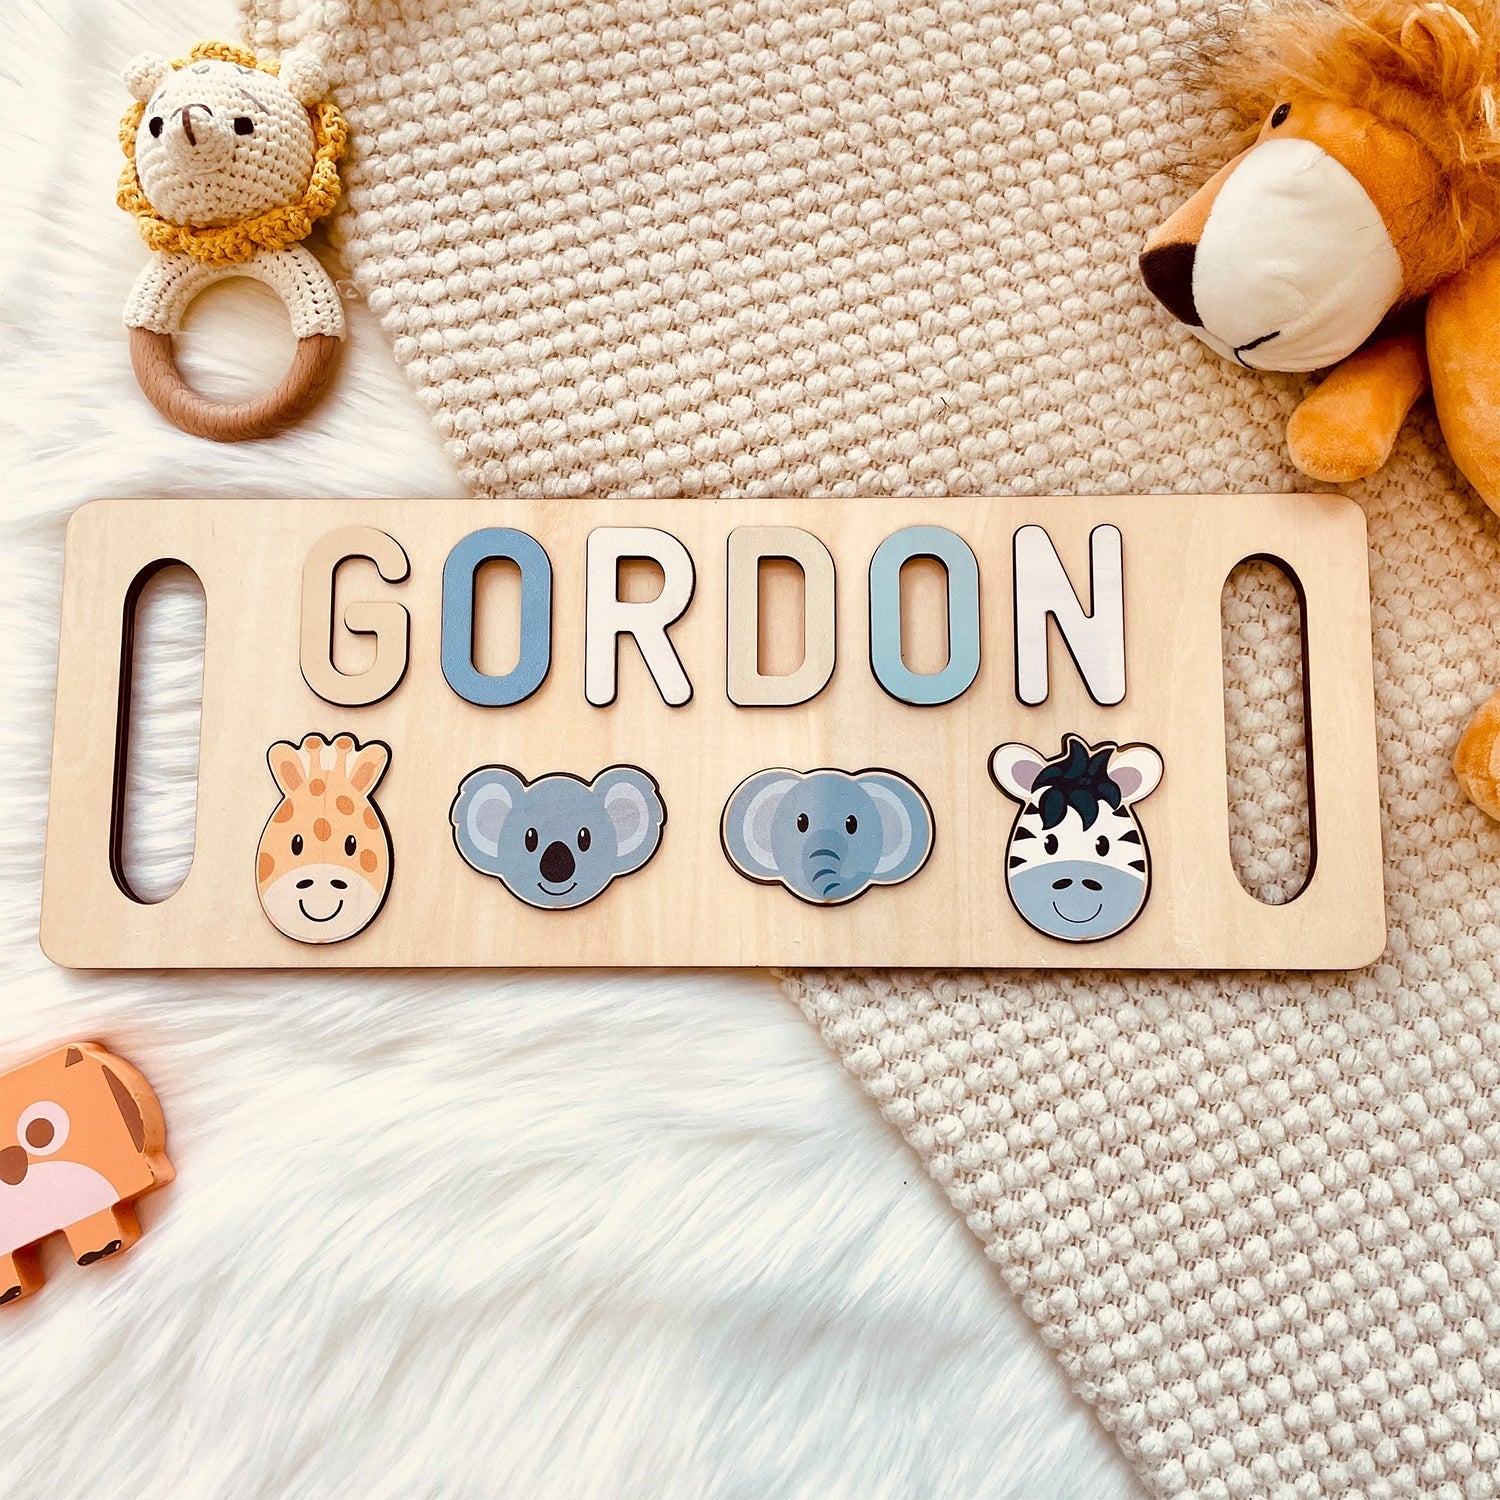 Personalised Wooden Baby Name Puzzle with Handle Product Name: Personalized Wooden Name Puzzle For Baby Gift Material: Eco-Friendly Plywood BasswoodLetters Available: Up to 10Engraving Messages: AvailableNon-Toxic: YesNon-Harmful: Yes Color: Pastel-boy; P